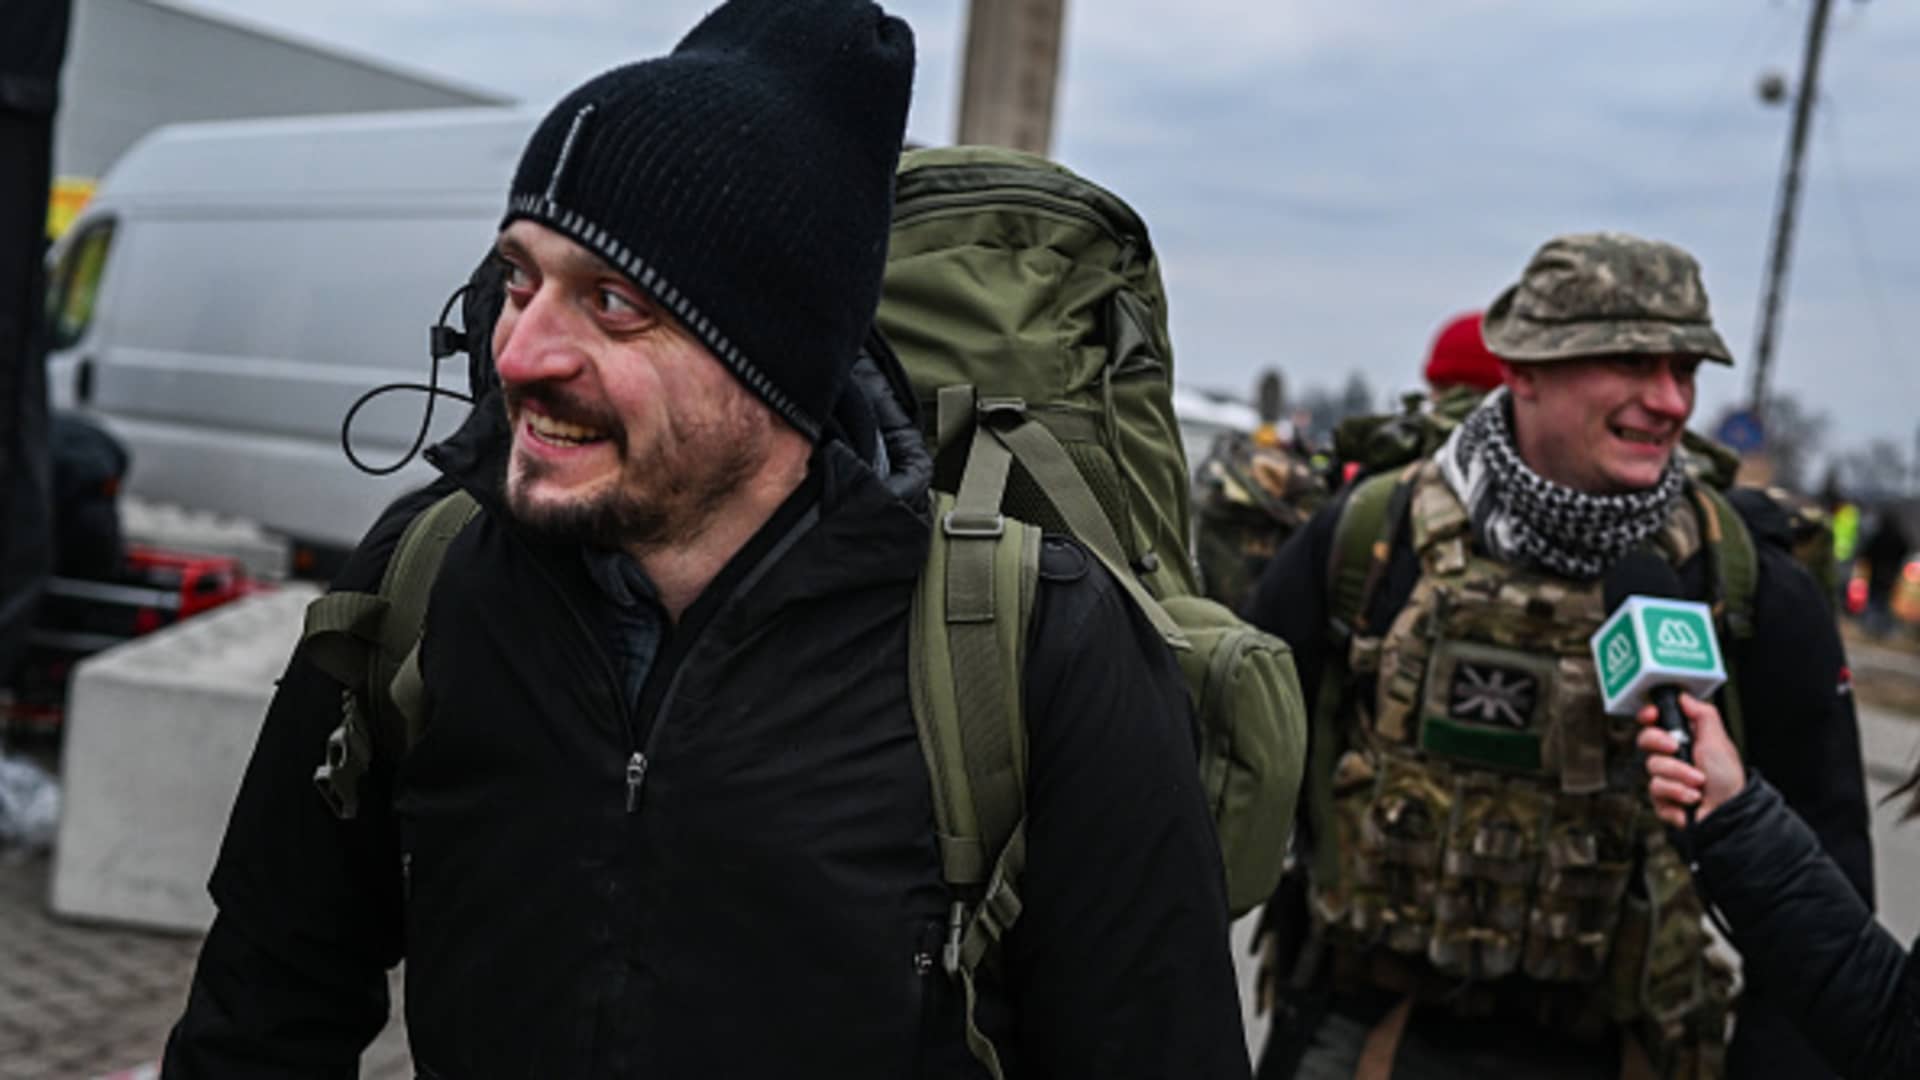 Mike and Alex from the United Kingdom who served in Afghanistan as paramedics arrive at the Polish Ukrainian border crossing looking for transport to Lviv to join the fight against the Russian invasion on March 06, 2022 in Medyka, Poland.